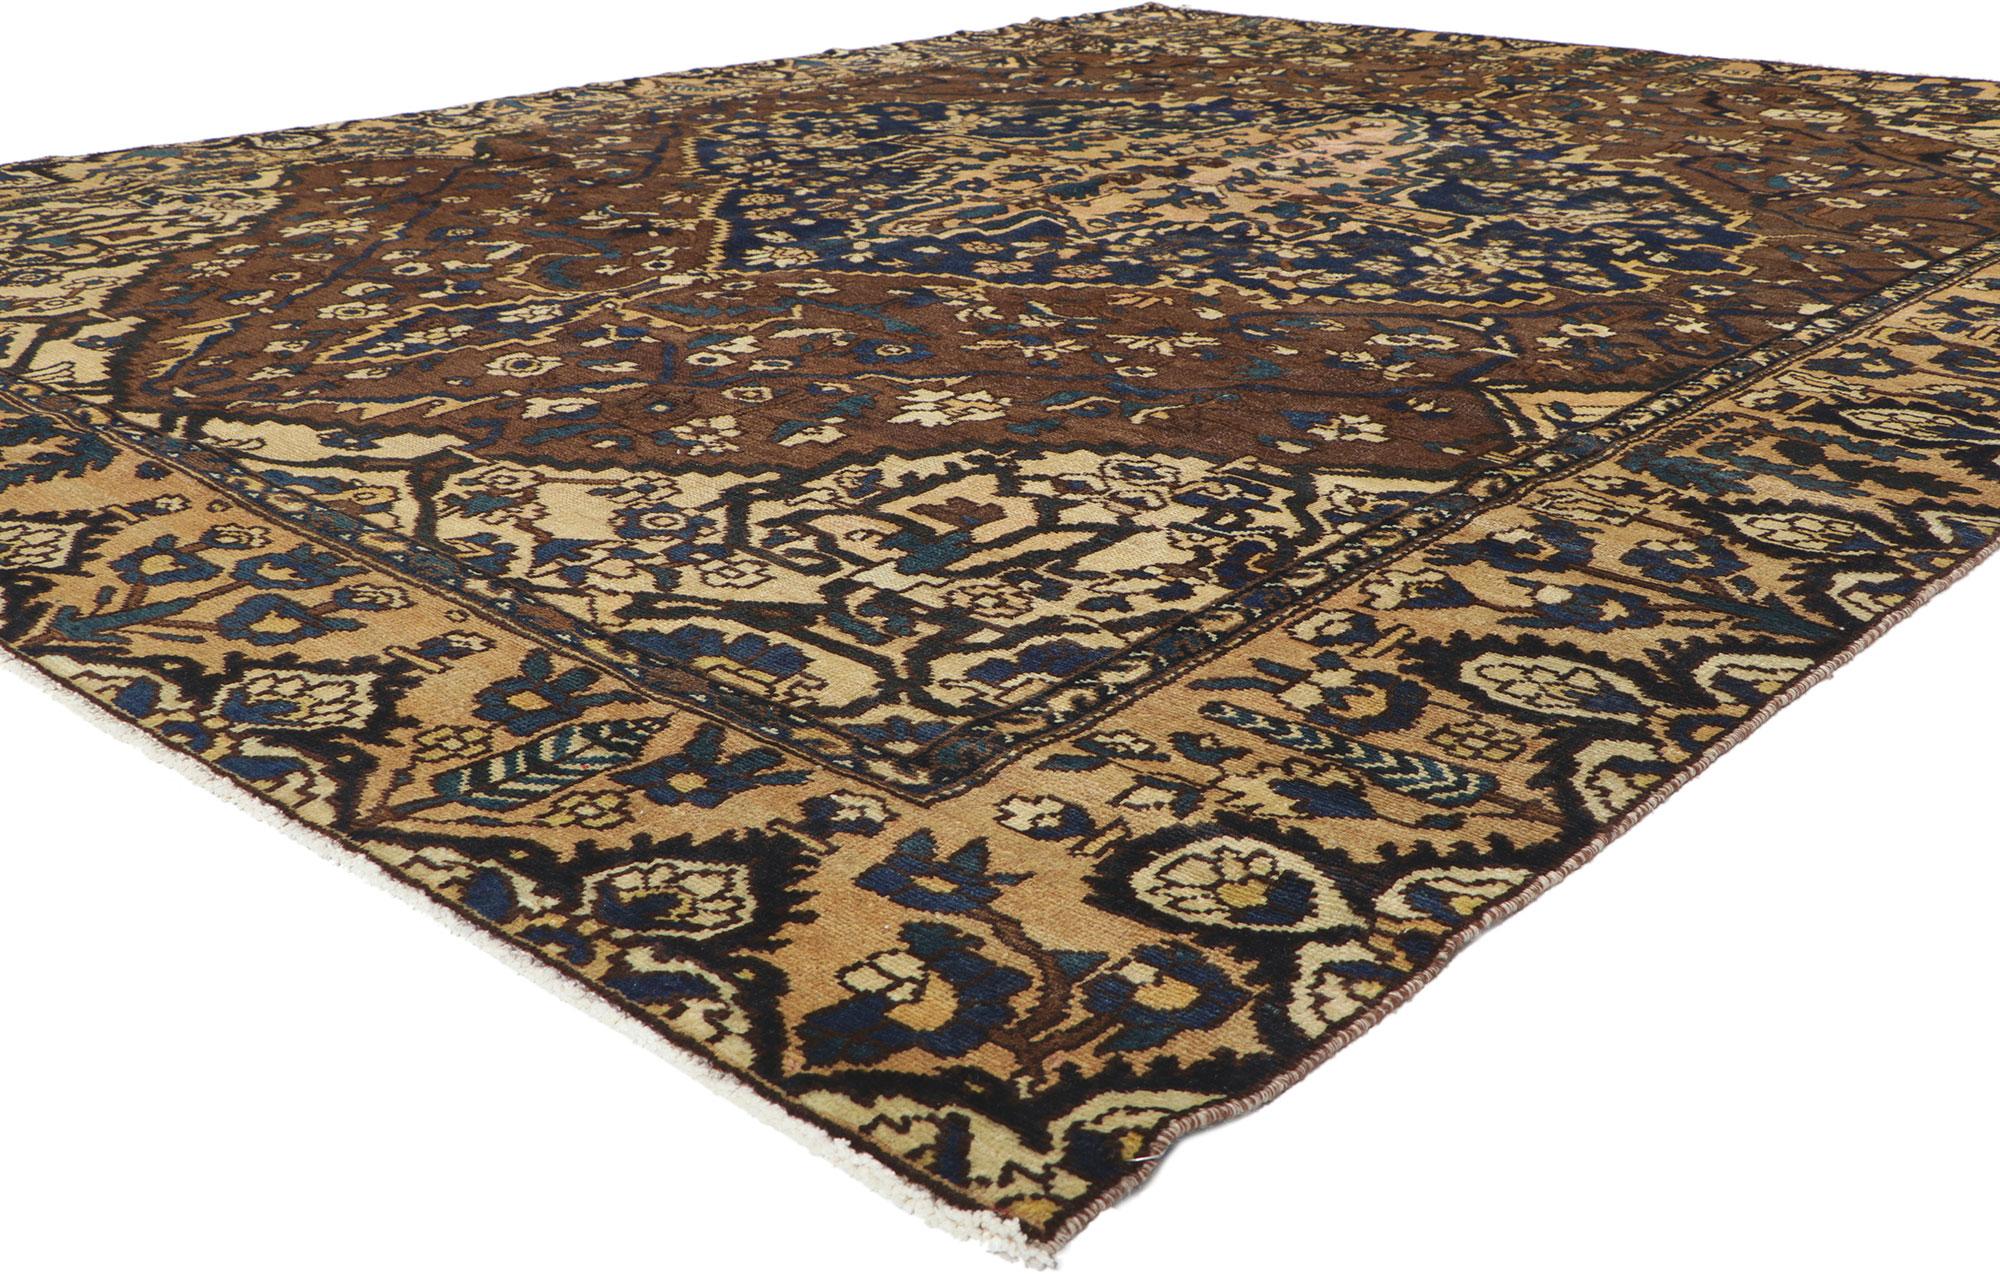 53749 Antique Persian Bakhtiari Rug, 09'04 x 11'11.
​Get ready to fall head over heels for this hand knotted antique Persian Bakhtiari rug! Radiating from the center is a large-scale medallion richly patterned with a beguiling stylized florals and